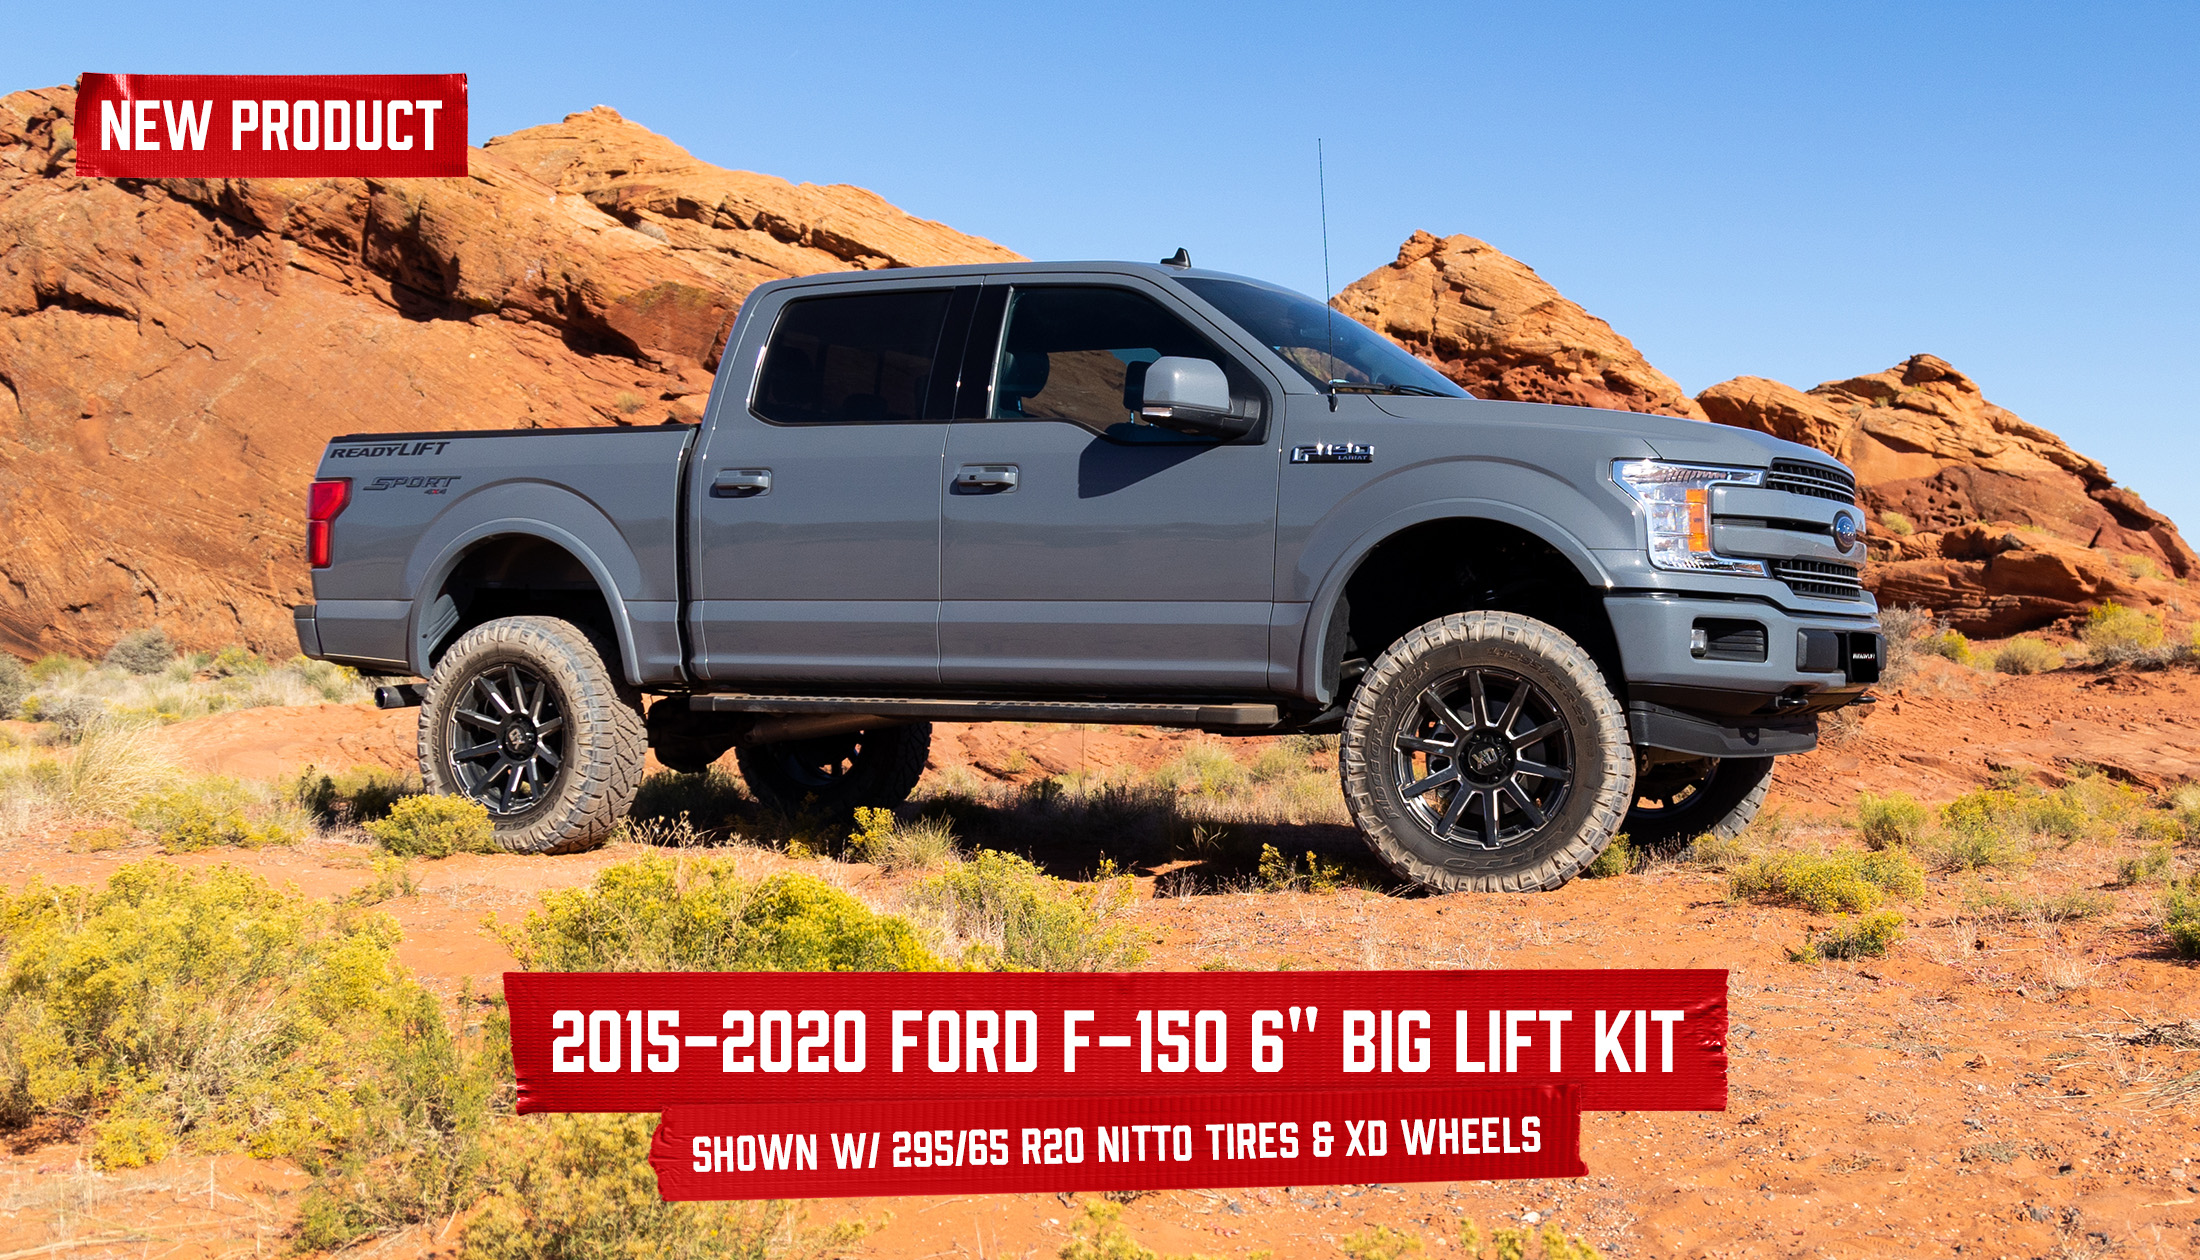 Readylift Now Shipping All New Big Lift Kits 2015 2020 Ford F 150 4wd 6″ Big Lift Kits Readylift